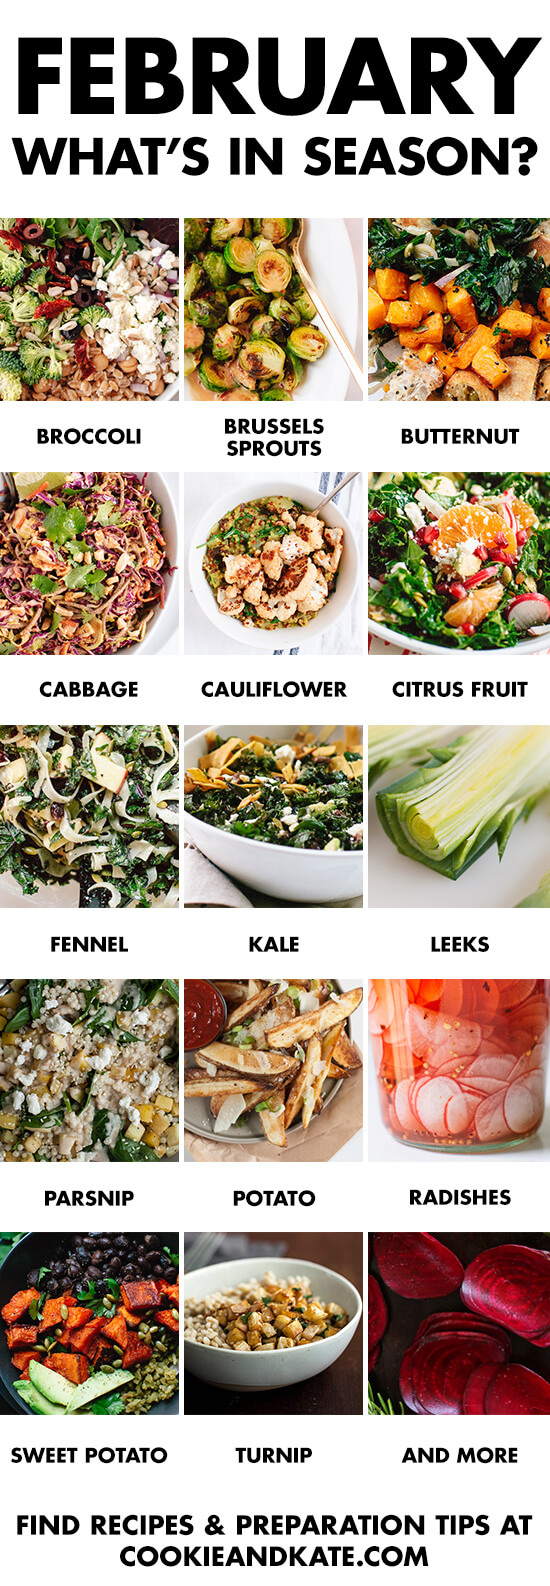 Eat seasonally with this guide to February fruits and vegetables. Find recipes and preparation tips at cookieandkate.com